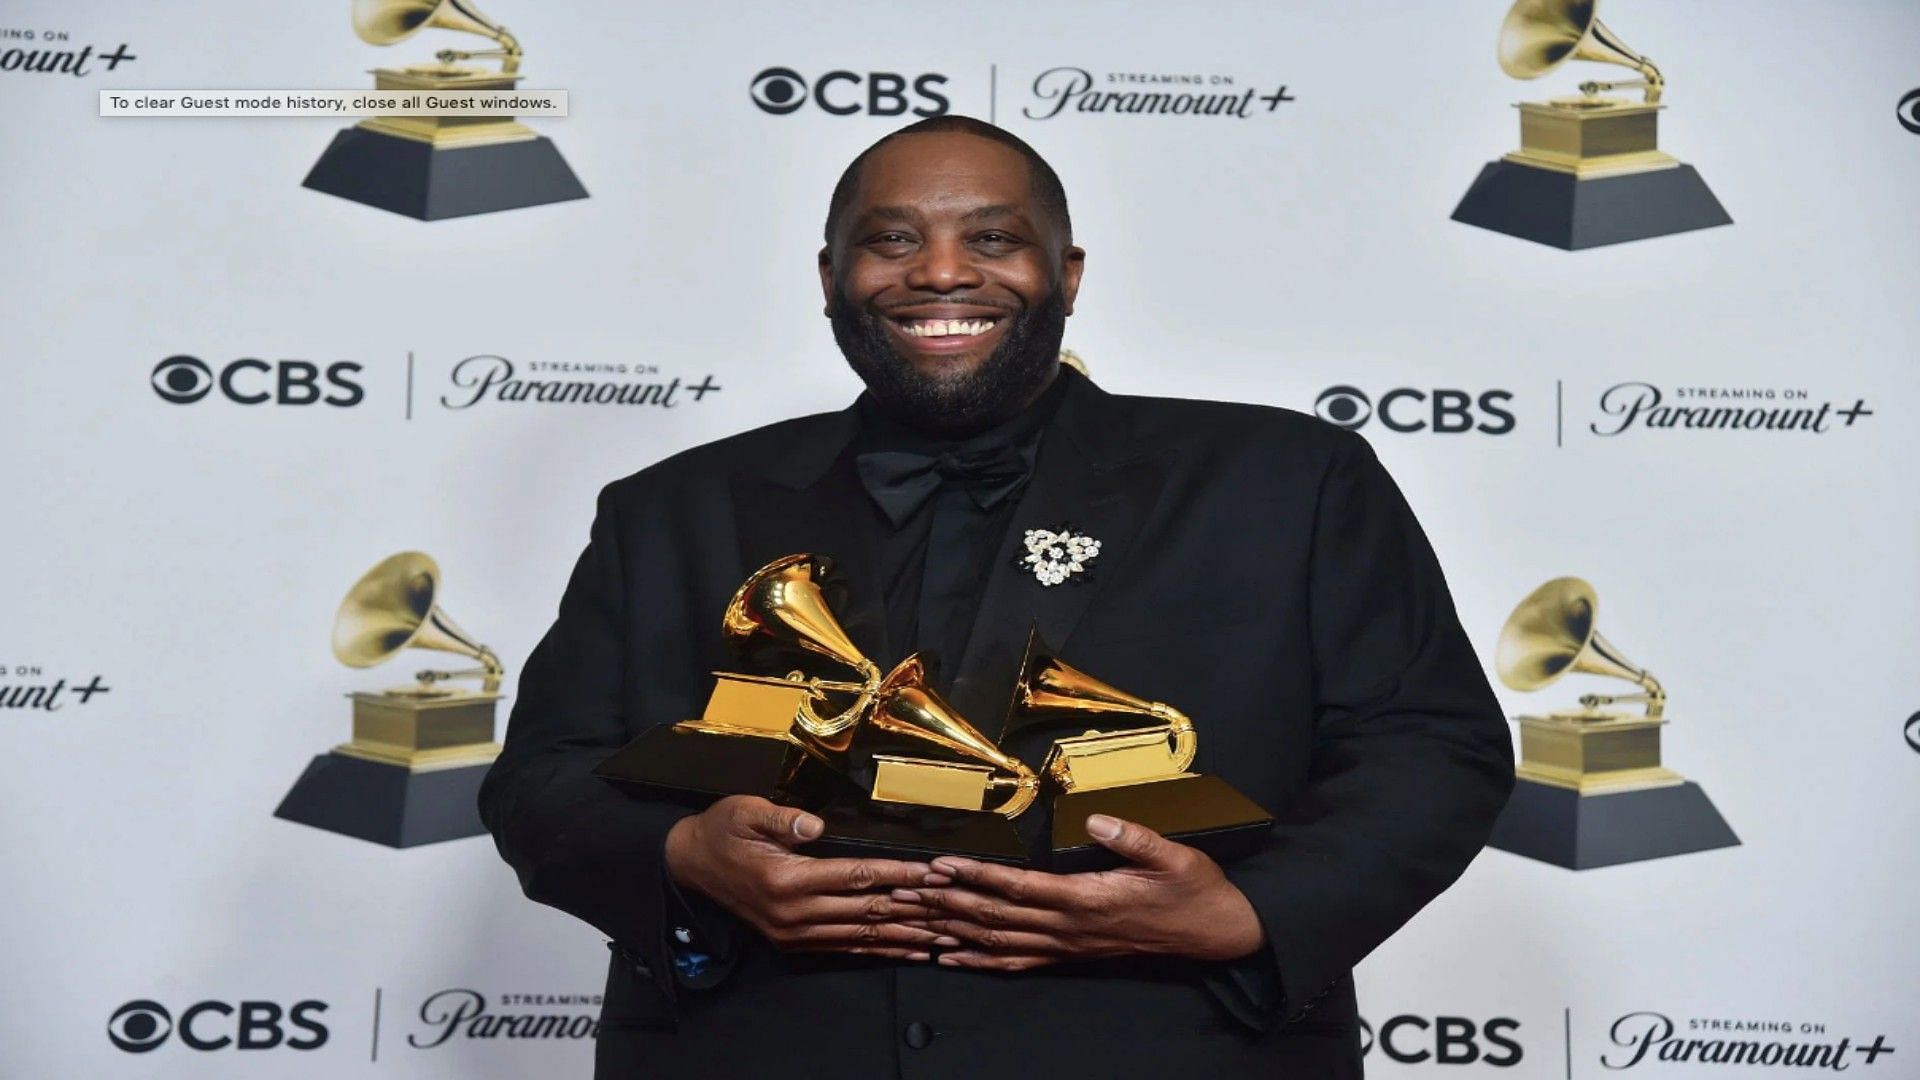 Killer mike at 66th GRAMMY Awards - Press Room (Image via Alberto E. Rodriguez/Getty Images for The Recording Academy)